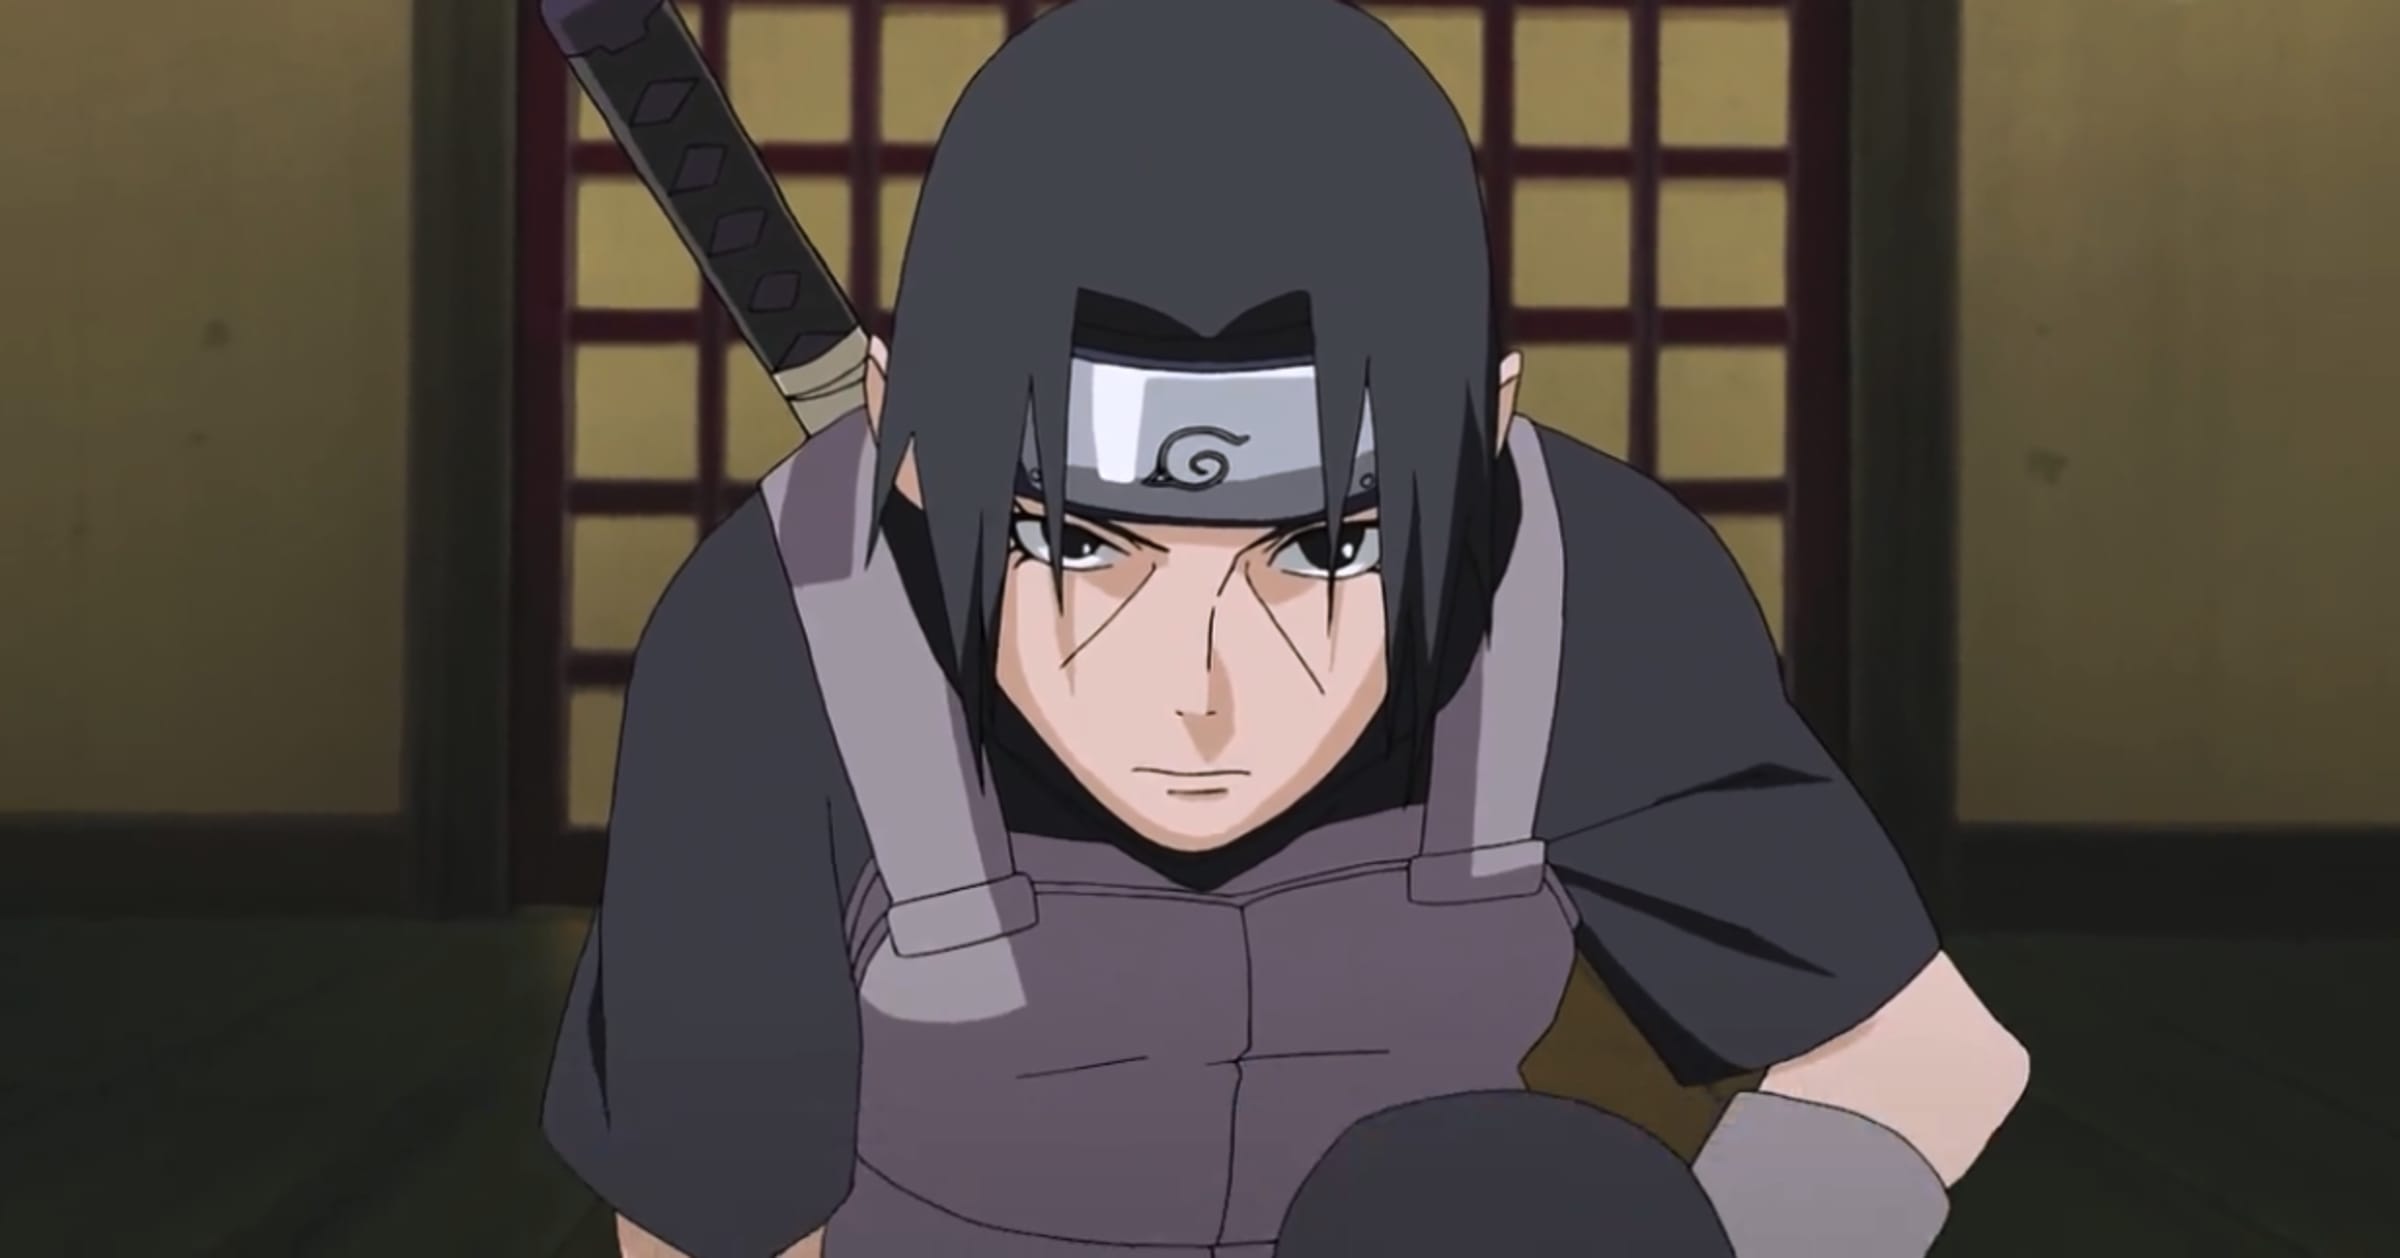 Here Are the Birthdays of All Your Favorite 'Naruto' Characters